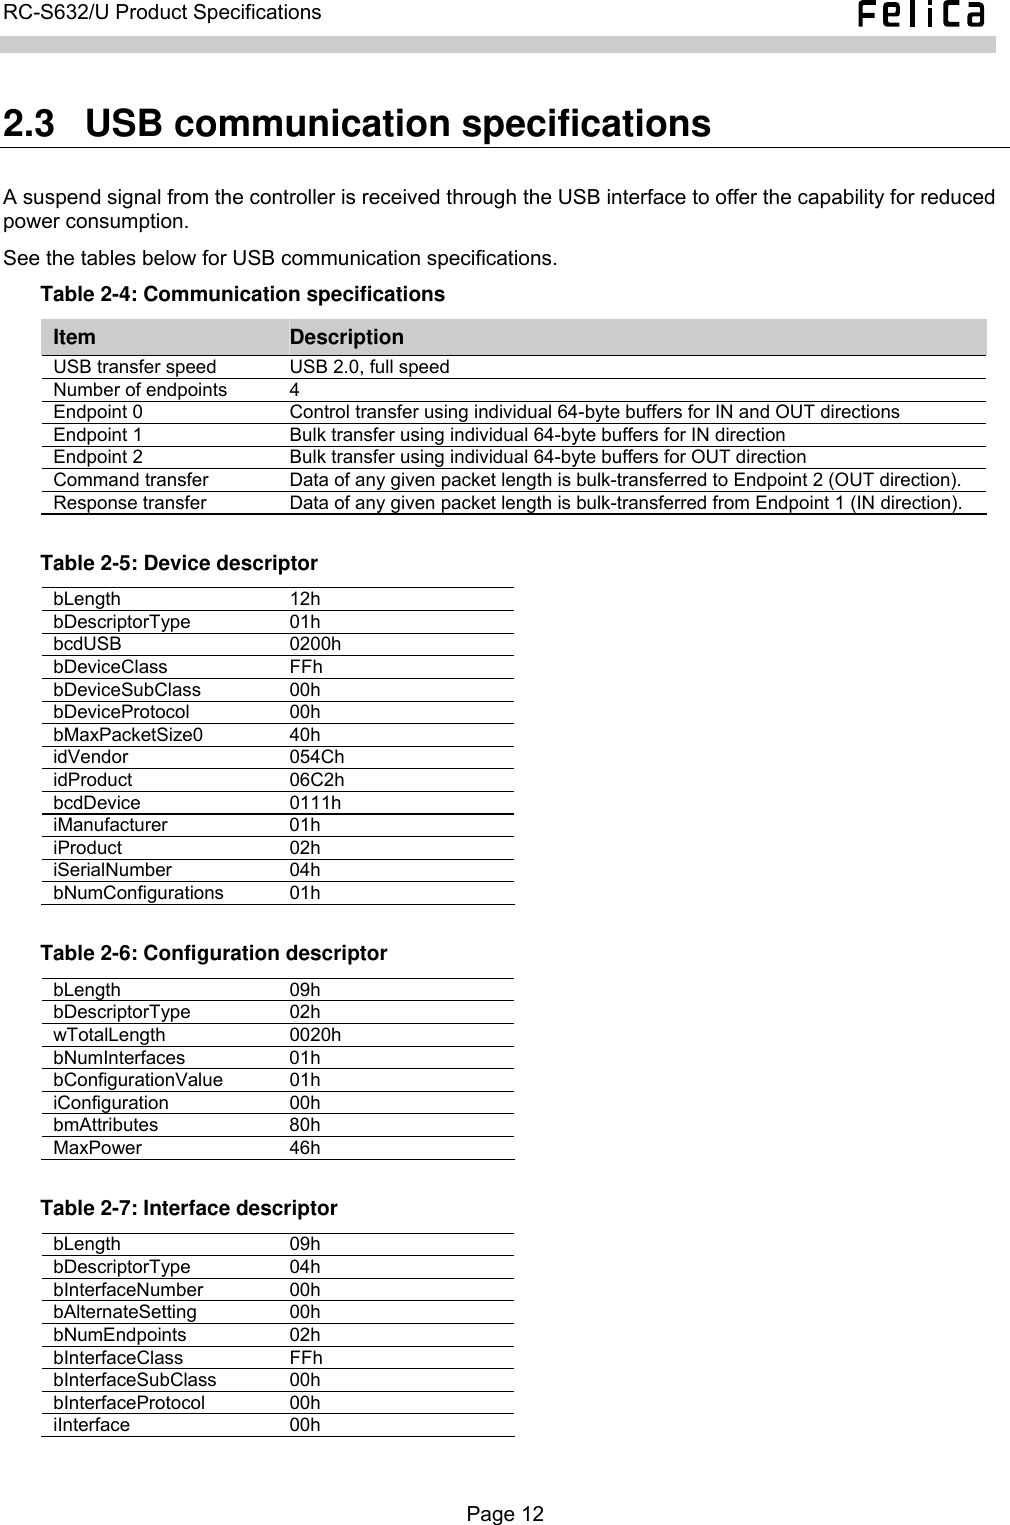   RC-S632/U Product Specifications  2.3  USB communication specifications A suspend signal from the controller is received through the USB interface to offer the capability for reduced power consumption. See the tables below for USB communication specifications. Table 2-4: Communication specifications Item  Description USB transfer speed  USB 2.0, full speed Number of endpoints  4 Endpoint 0  Control transfer using individual 64-byte buffers for IN and OUT directions Endpoint 1  Bulk transfer using individual 64-byte buffers for IN direction Endpoint 2  Bulk transfer using individual 64-byte buffers for OUT direction Command transfer  Data of any given packet length is bulk-transferred to Endpoint 2 (OUT direction). Response transfer  Data of any given packet length is bulk-transferred from Endpoint 1 (IN direction).  Table 2-5: Device descriptor bLength 12h bDescriptorType 01h bcdUSB 0200h bDeviceClass FFh bDeviceSubClass 00h bDeviceProtocol 00h bMaxPacketSize0 40h idVendor 054Ch idProduct 06C2h bcdDevice 0111h iManufacturer 01h iProduct 02h iSerialNumber 04h bNumConfigurations 01h  Table 2-6: Configuration descriptor bLength 09h bDescriptorType 02h wTotalLength 0020h bNumInterfaces 01h bConfigurationValue 01h iConfiguration 00h bmAttributes 80h MaxPower 46h  Table 2-7: Interface descriptor bLength 09h bDescriptorType 04h bInterfaceNumber 00h bAlternateSetting 00h bNumEndpoints 02h bInterfaceClass FFh bInterfaceSubClass 00h bInterfaceProtocol 00h iInterface 00h   Page 12  